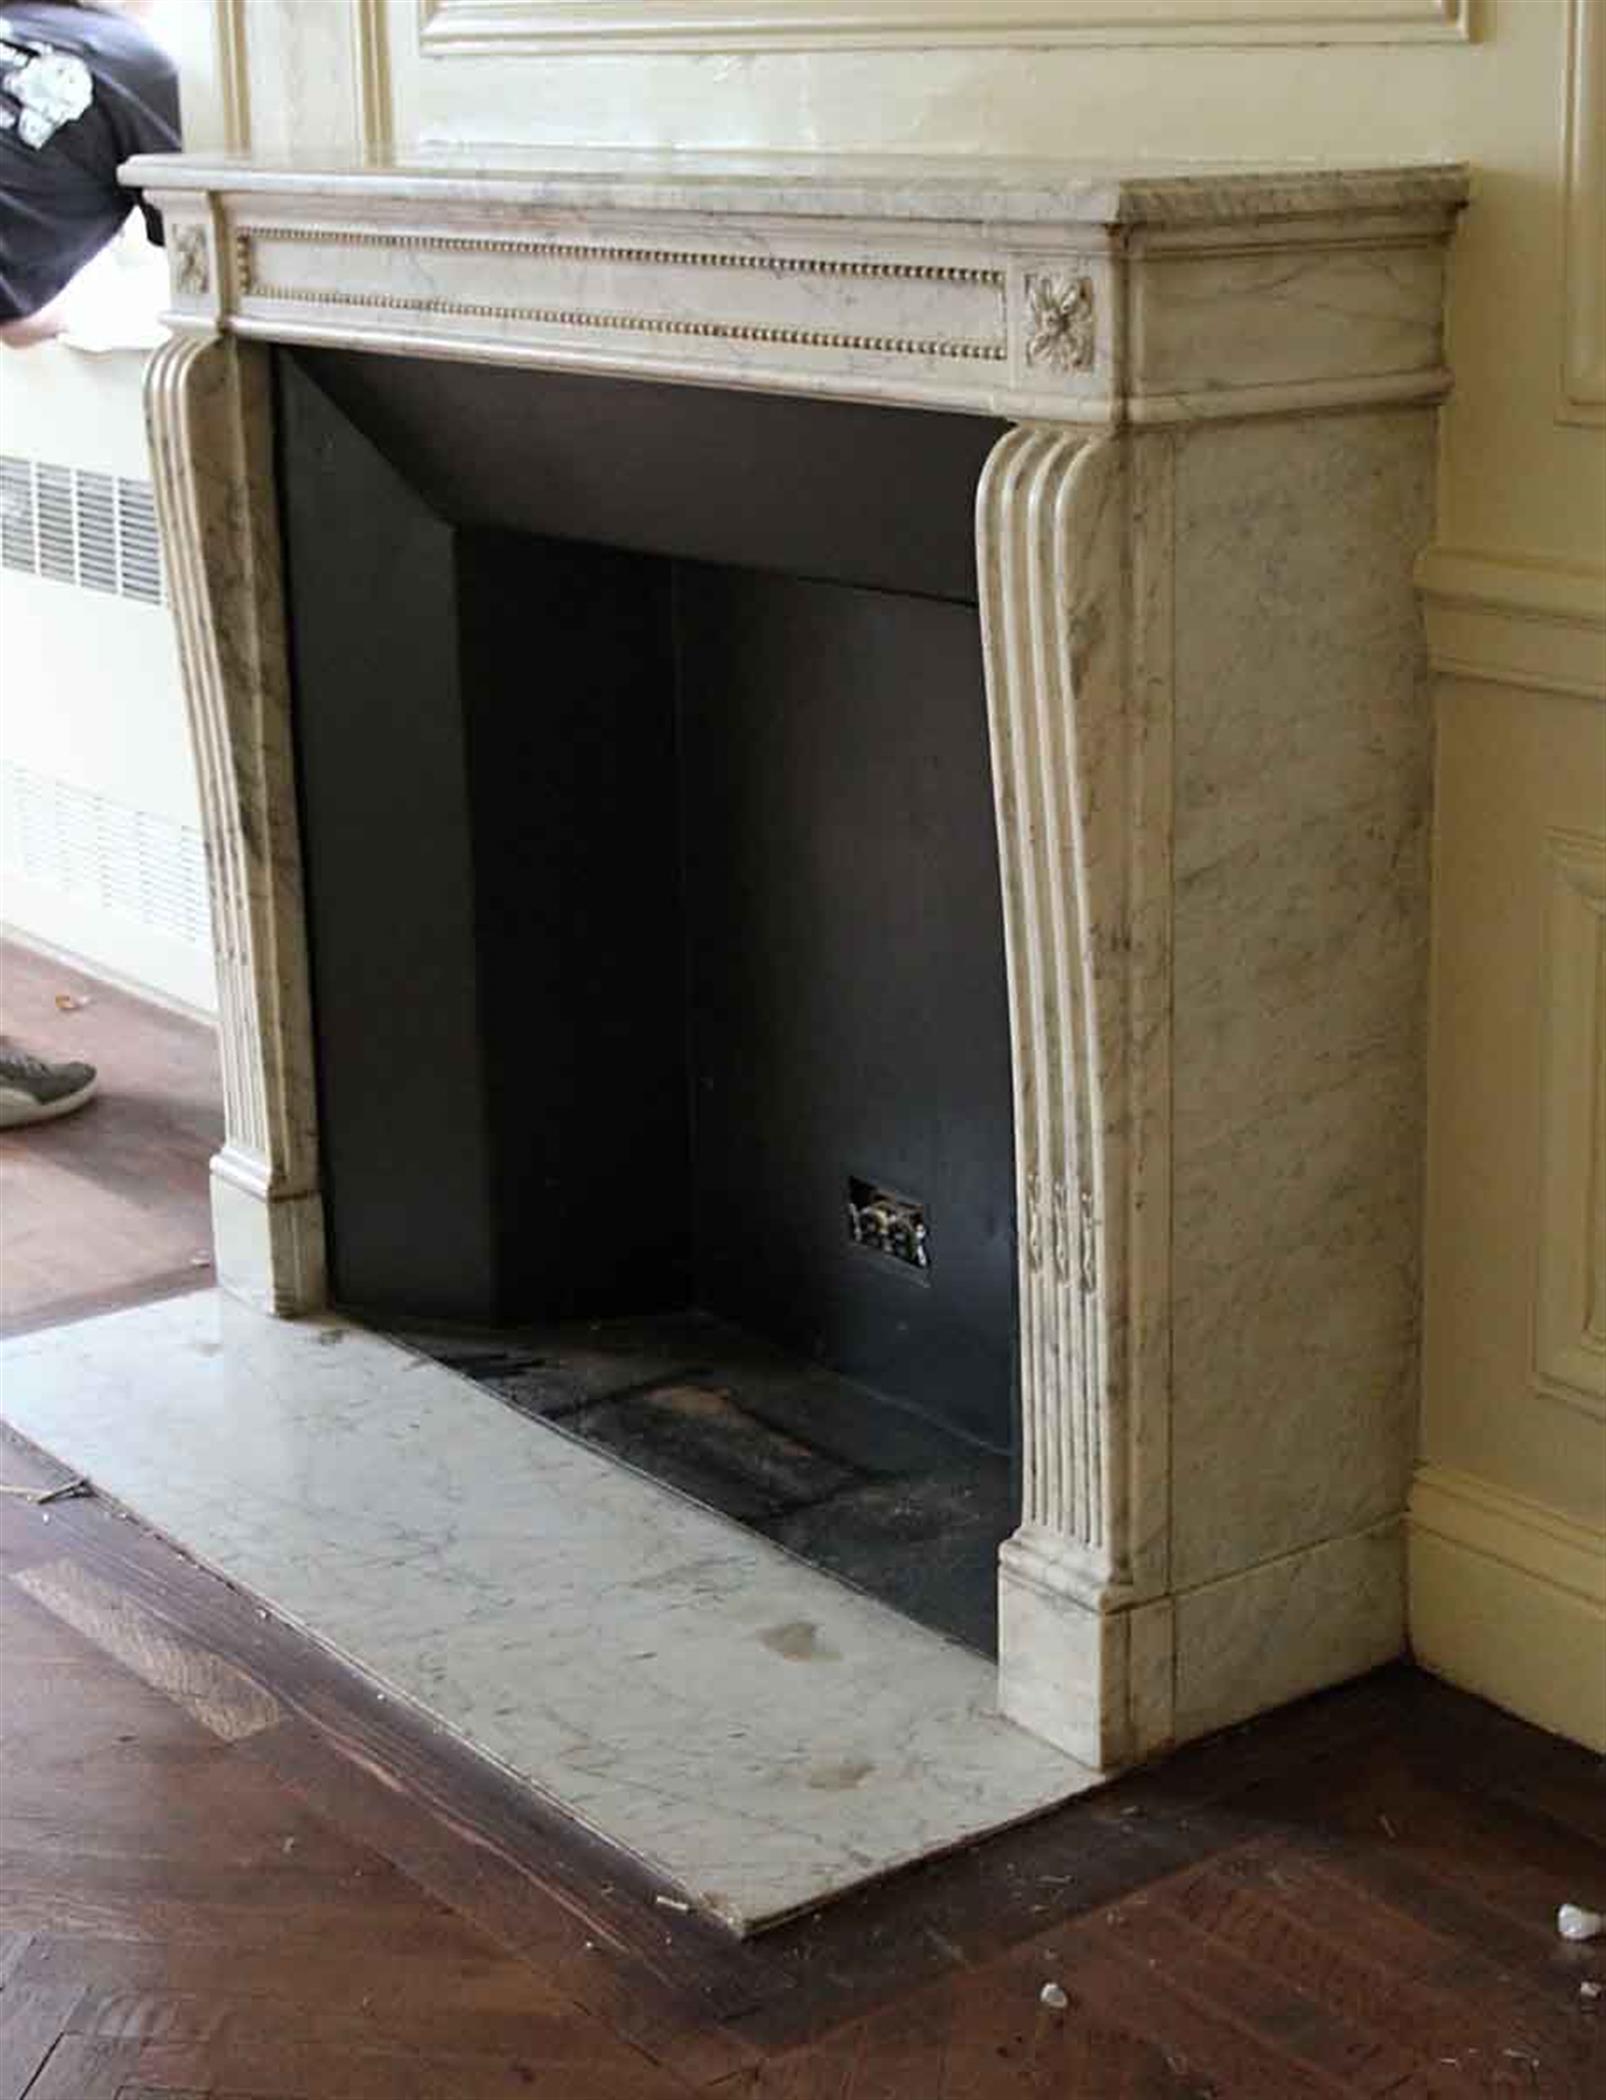 1890s French Regency Louis XVI style white hand carved marble mantel with gray veining and decorative detail along the header and floral motifs on the top plinths. This mantel was one of a group of antique mantels imported from Europe and installed